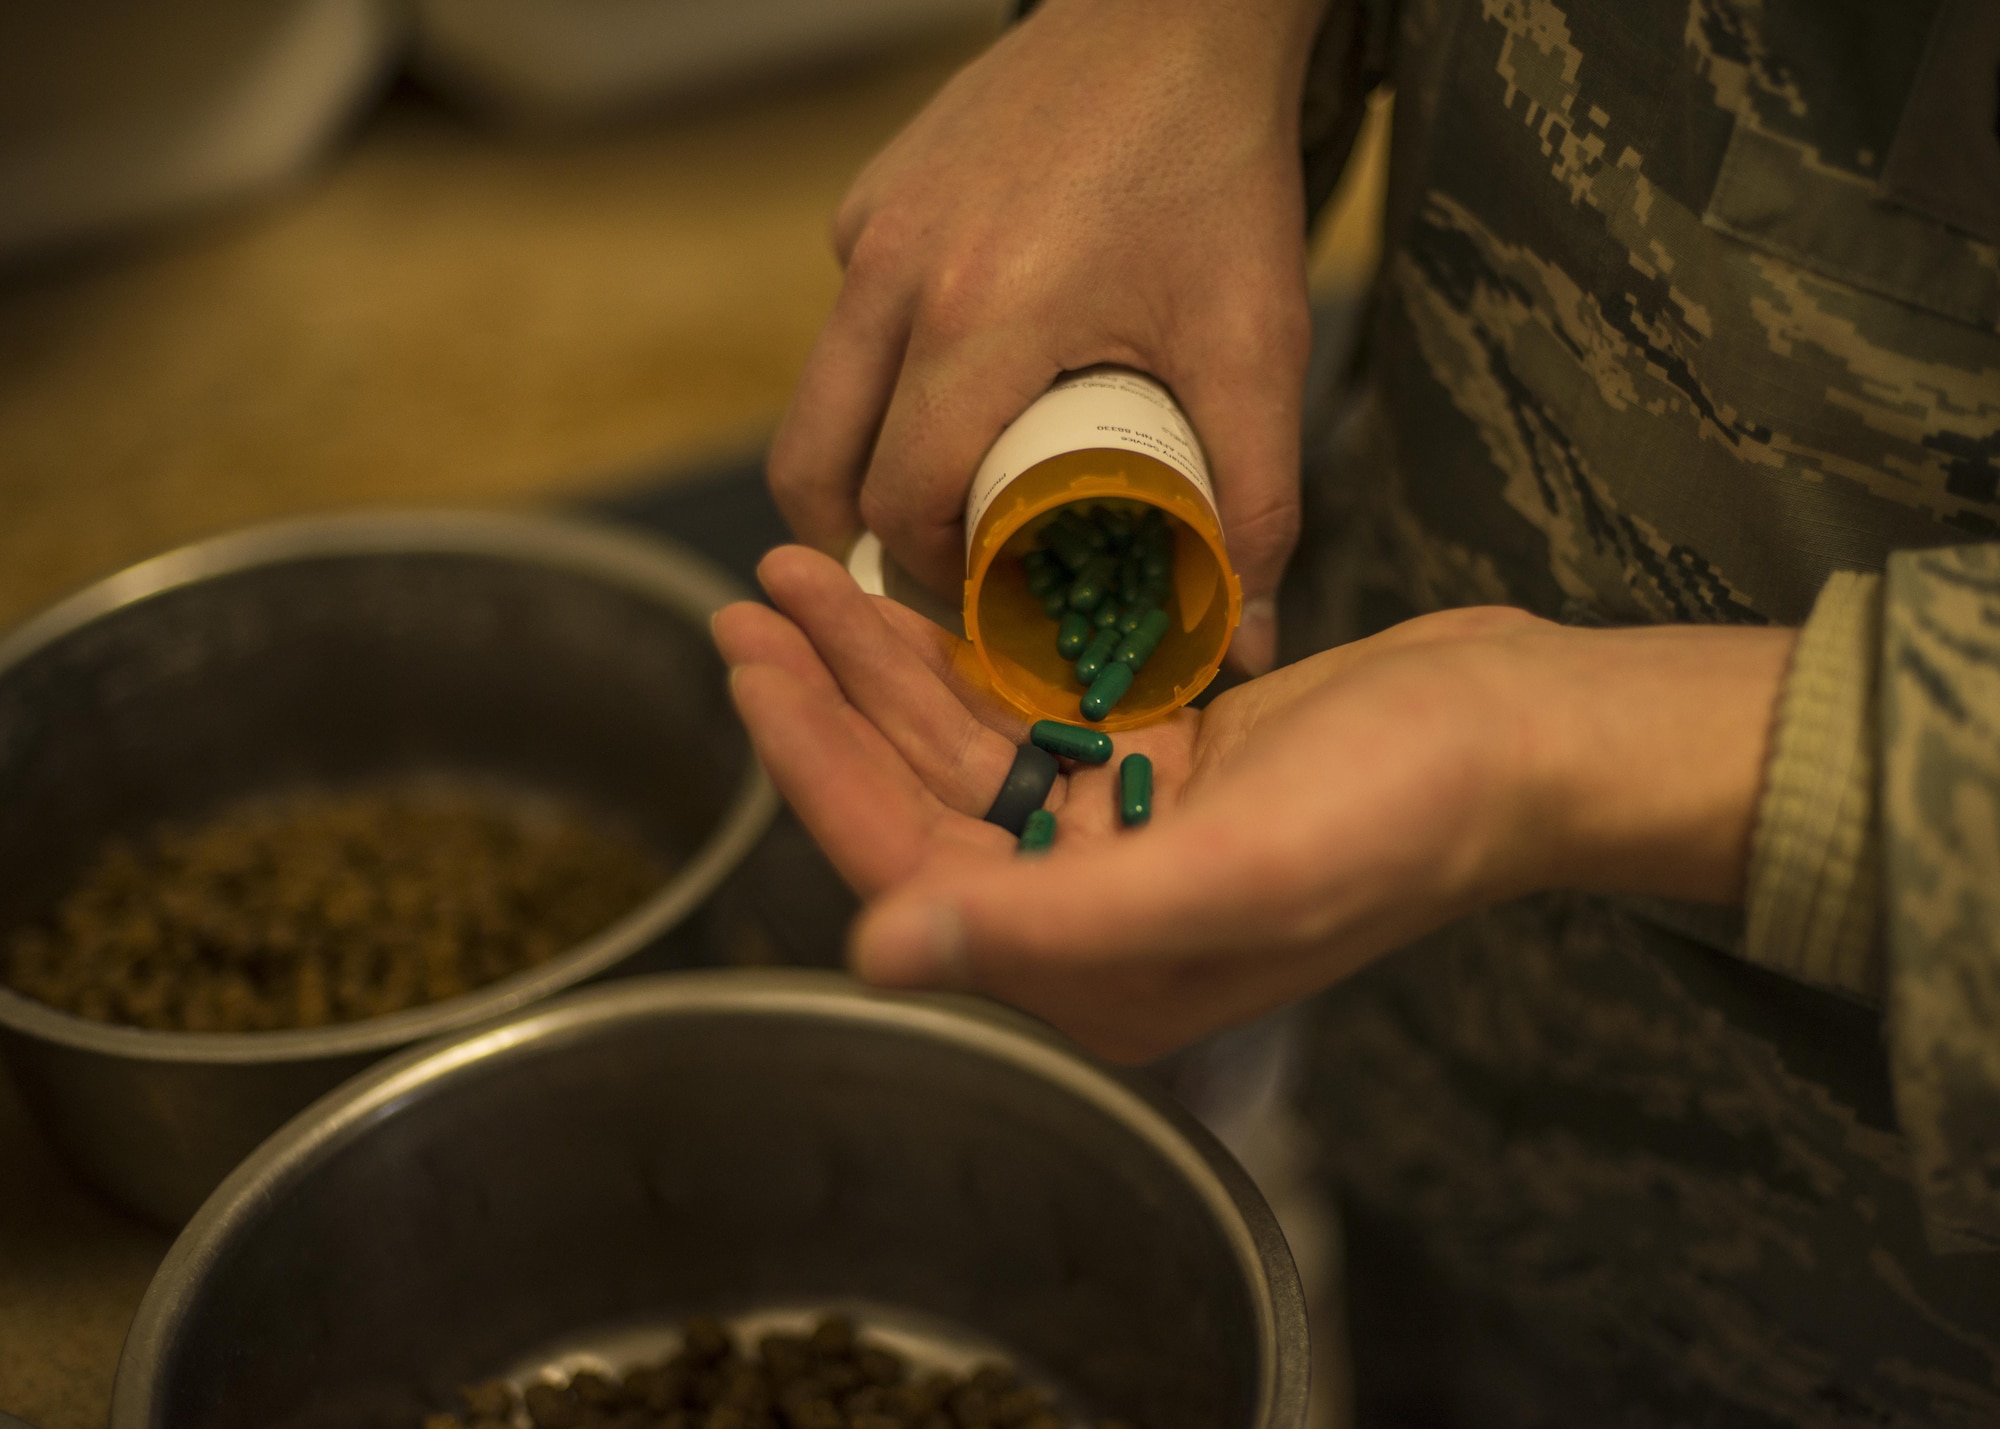 A military working dog handler, with the 49th Security Forces Squadron, measures and transfers medication into an ill military working dog’s bowl at Holloman Air Force Base, N.M. Dec. 12, 2016. Four of Holloman’s MWDs are battling health and medical related issues. To prevent and combat illness, the dogs routinely attend dental and medical checkups at the veterinary clinic on base. (U.S. Air Force photo by Airman 1st Class Alexis P. Docherty)

